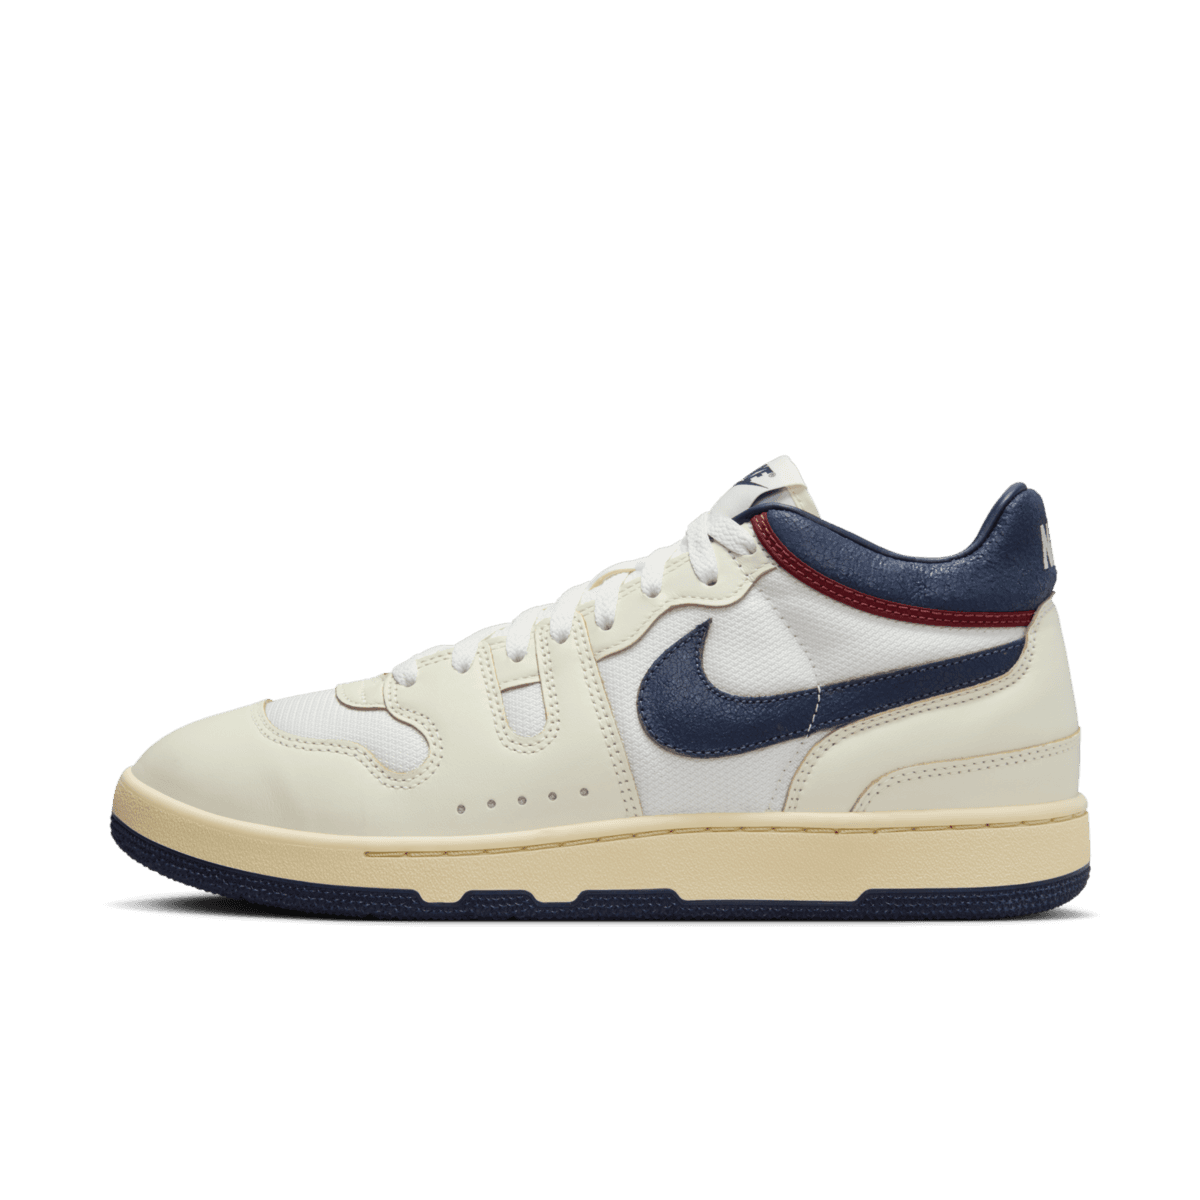 Nike Mac Attack Premium'Better With Age'